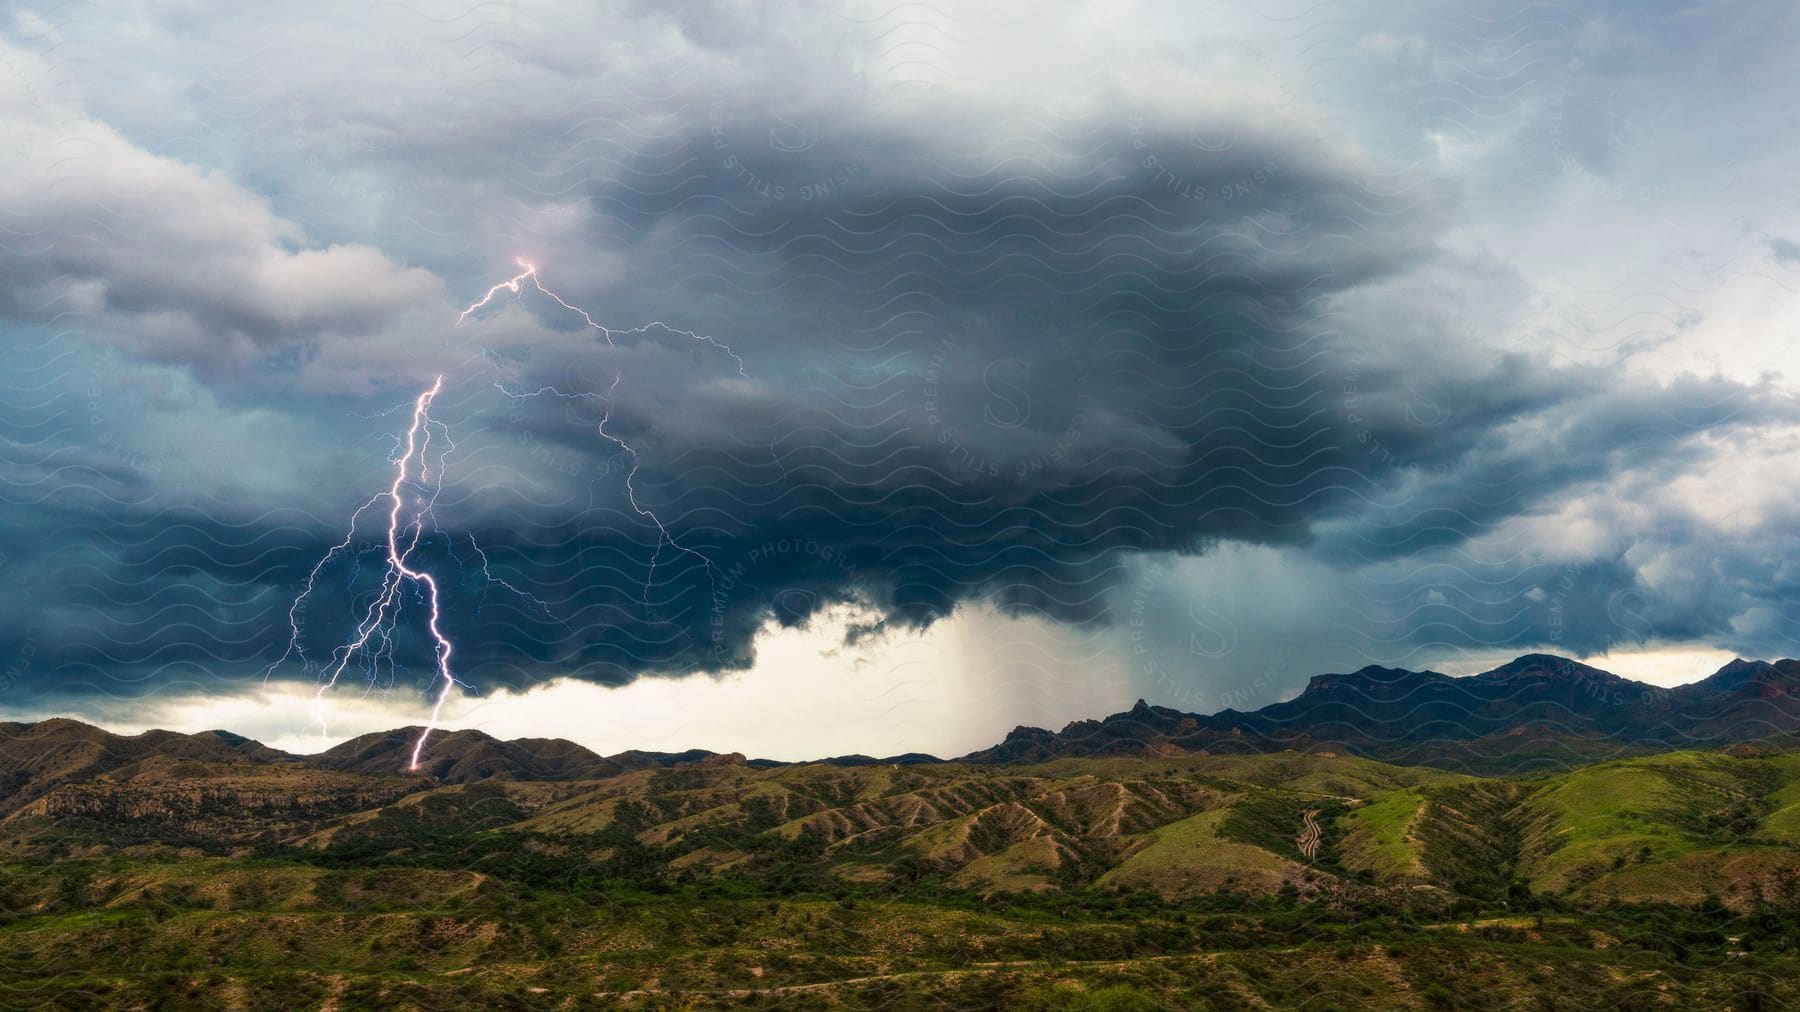 A lightning bolt strikes near castle rock in the mountains of the coronado national forest highlighting the power of nature